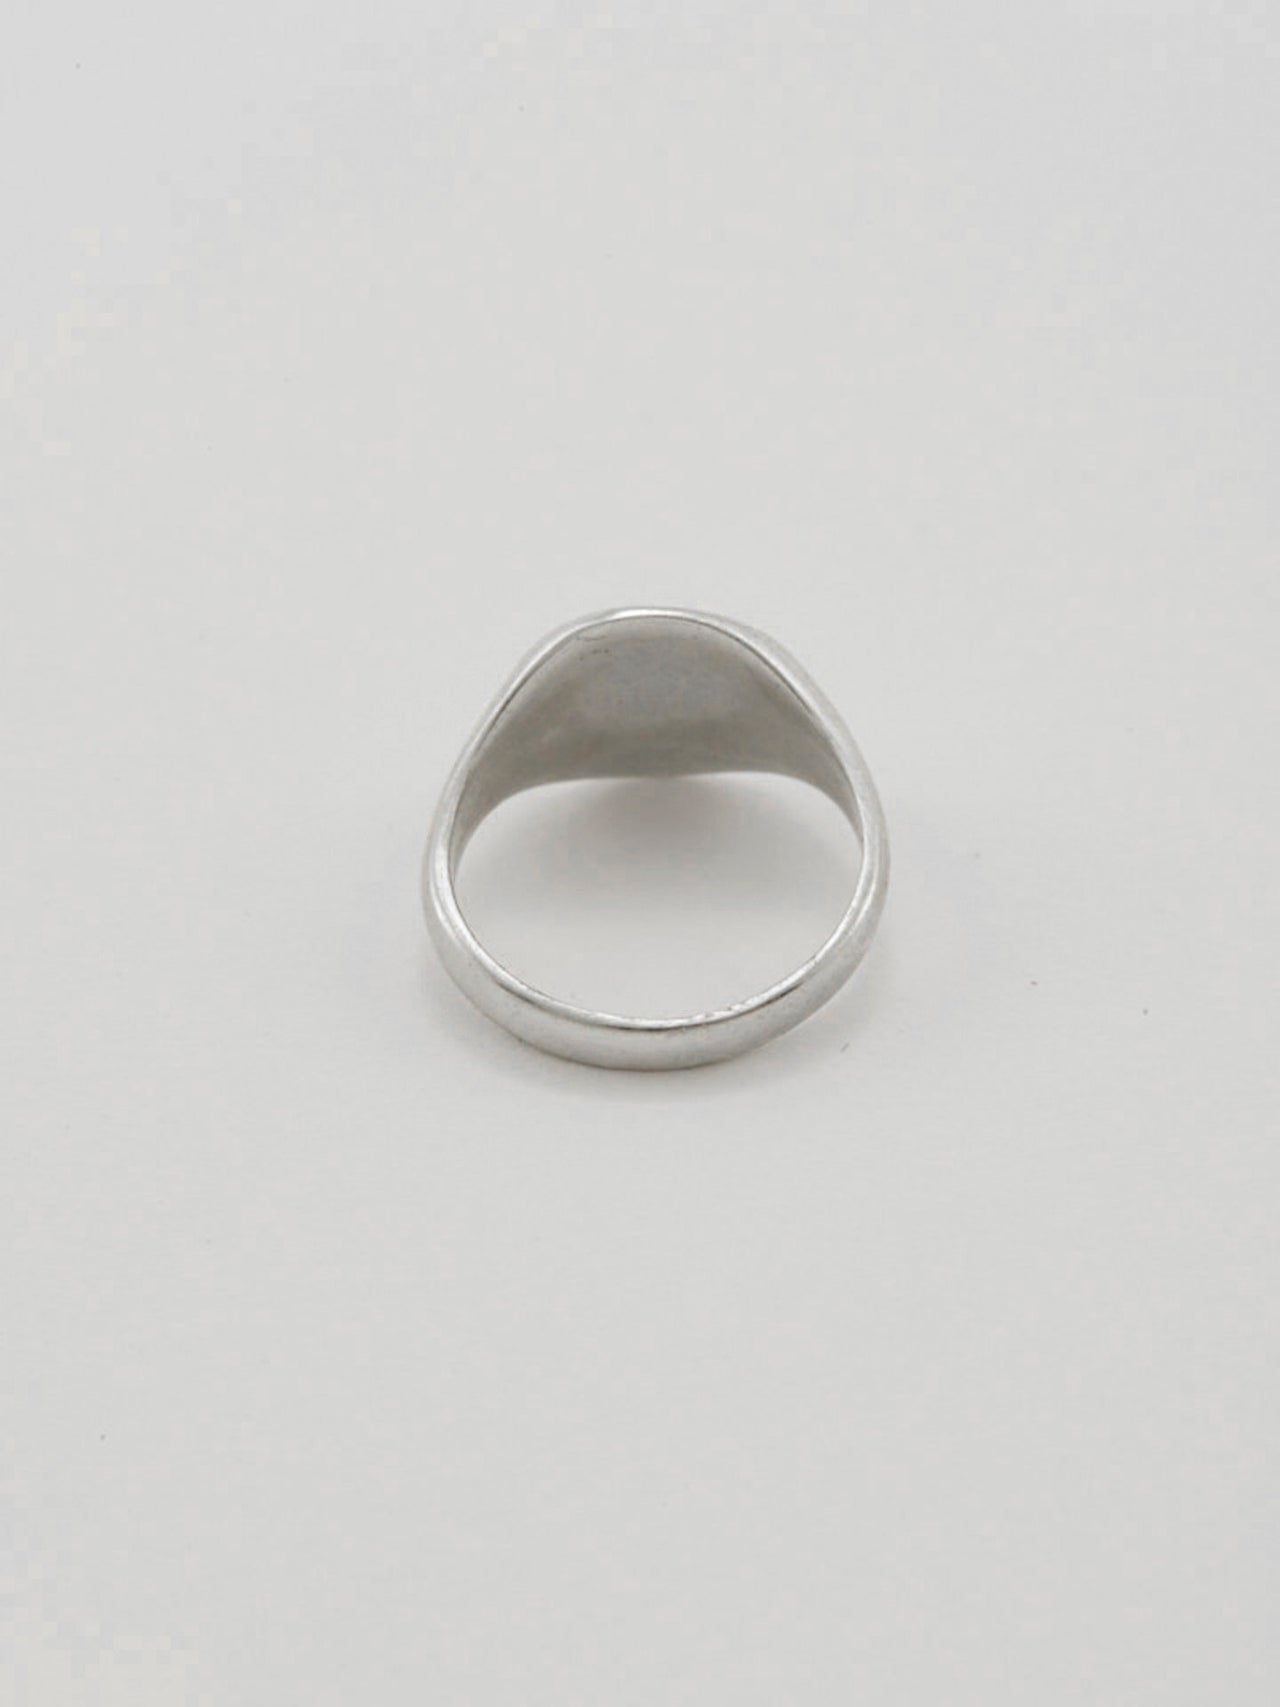 Back Shot of Baby Signet Ring: Sterling Silver Signet Ring ID Signet with a 10mm Diameter